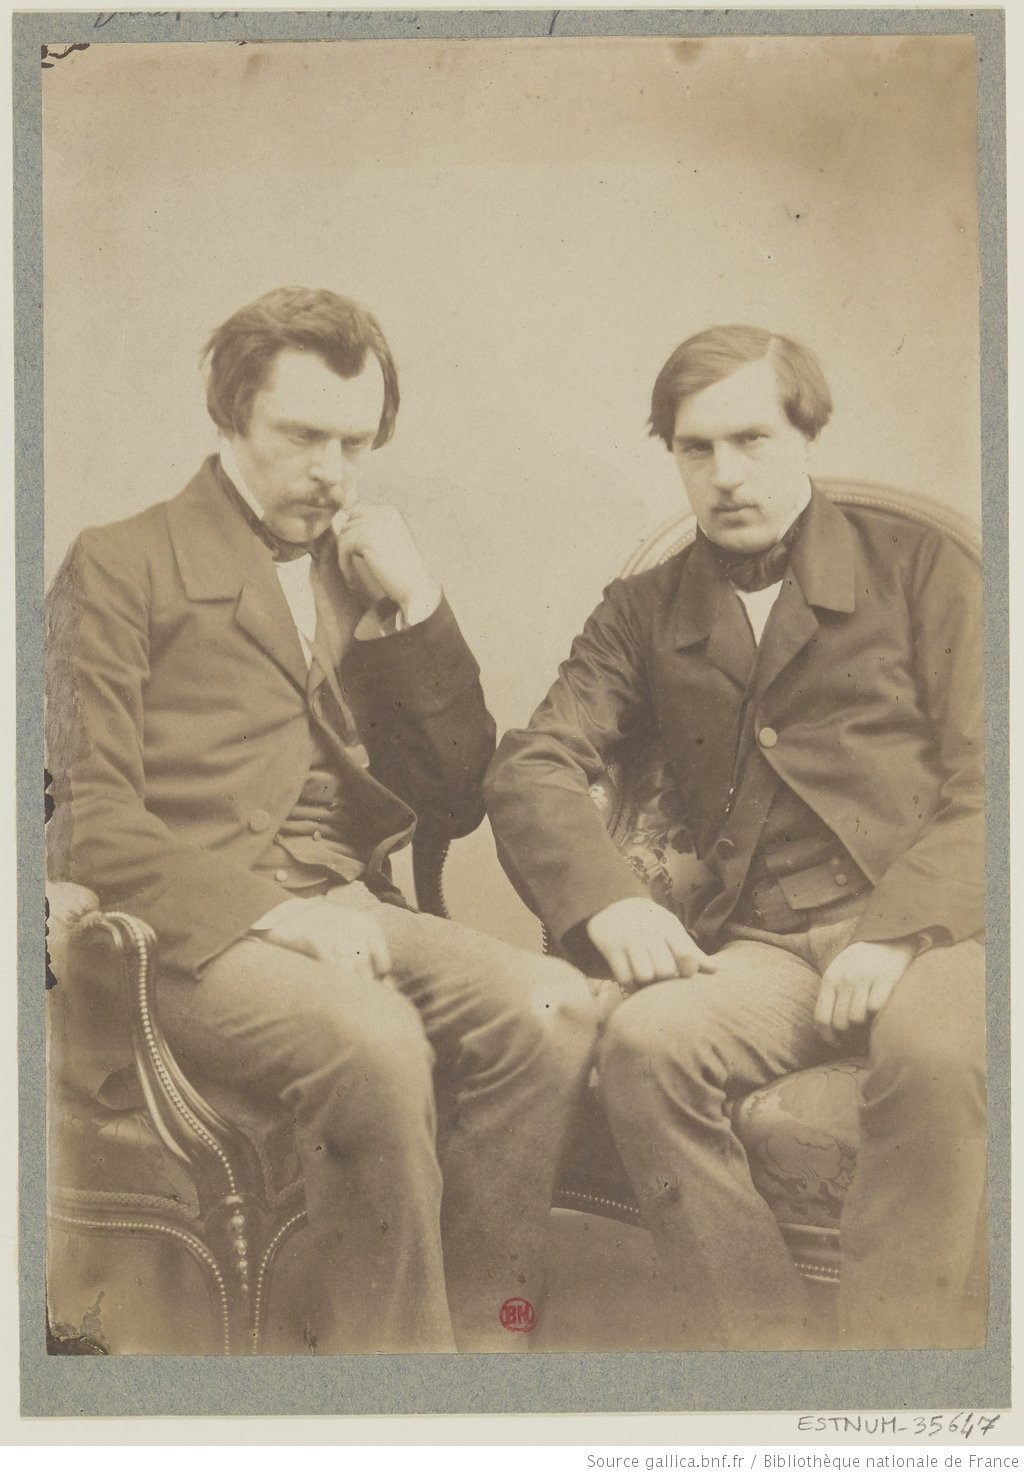 Photograph of the Goncourt brother